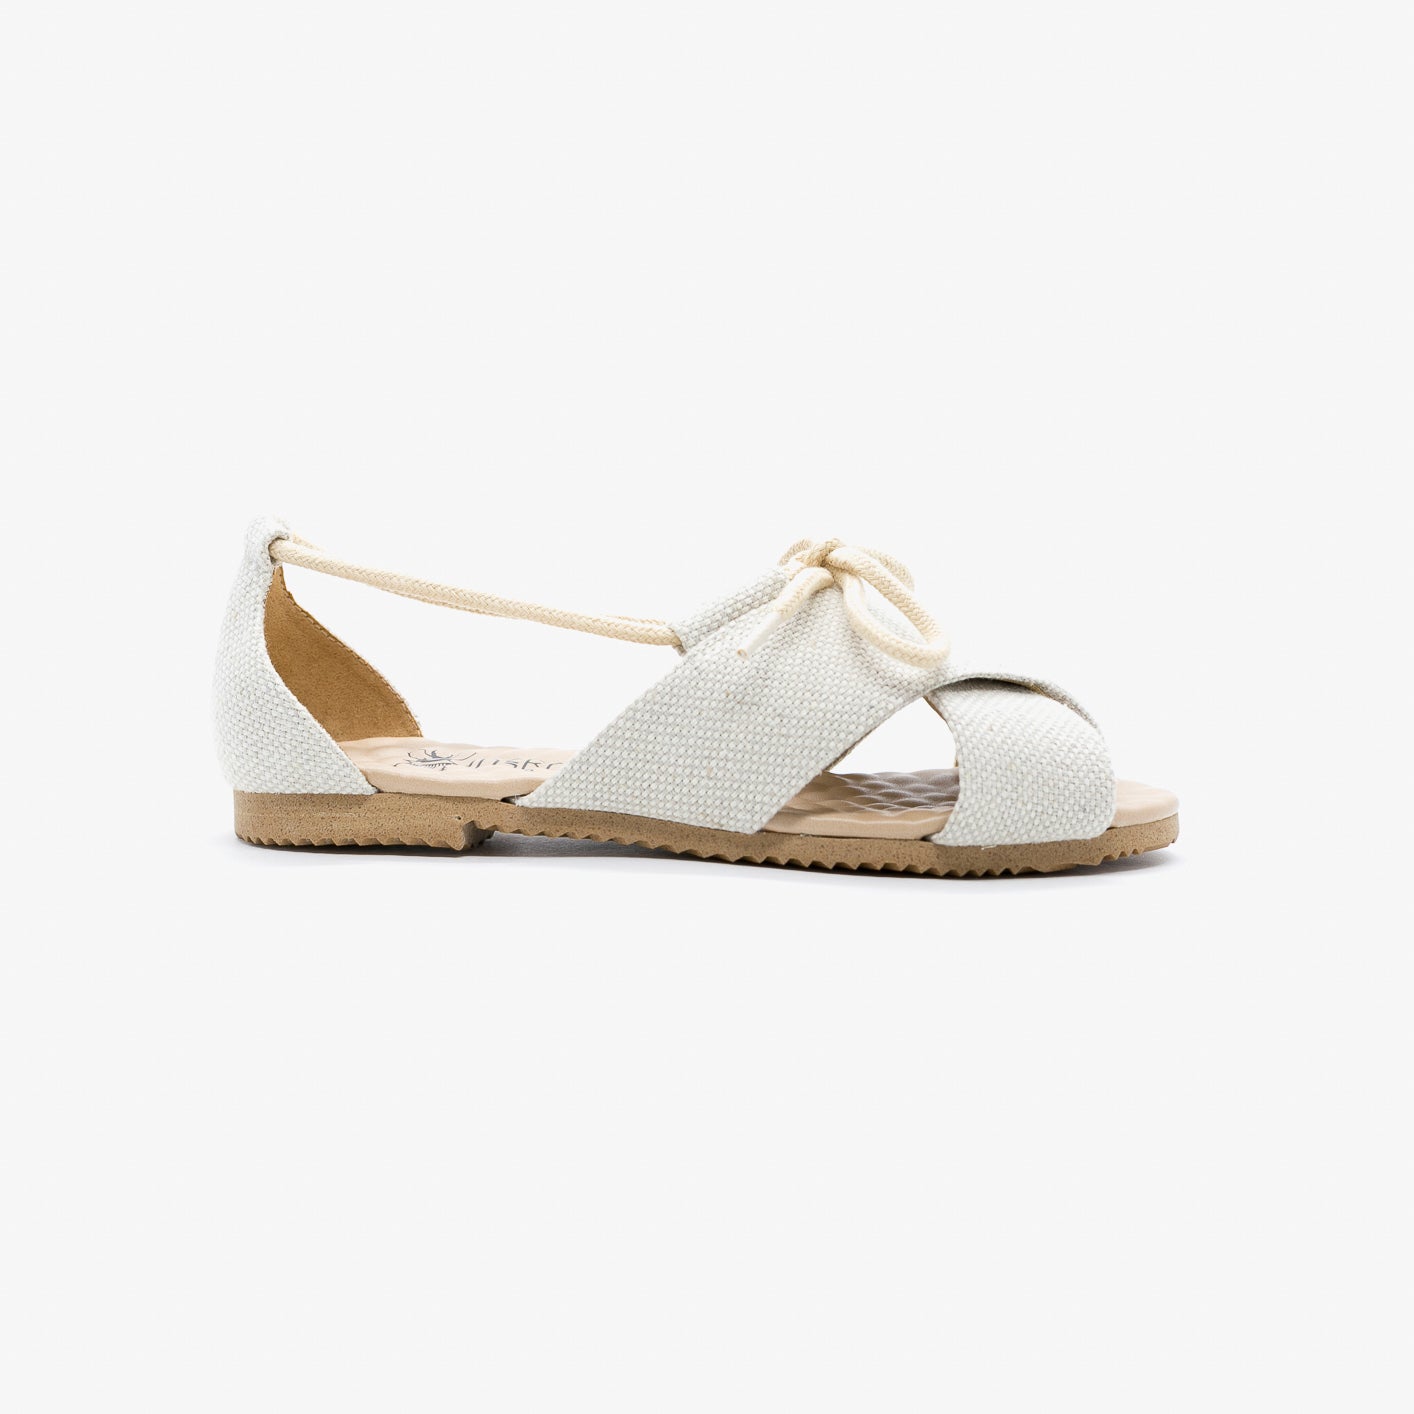 Canvas Sandal - Insecta Shoes